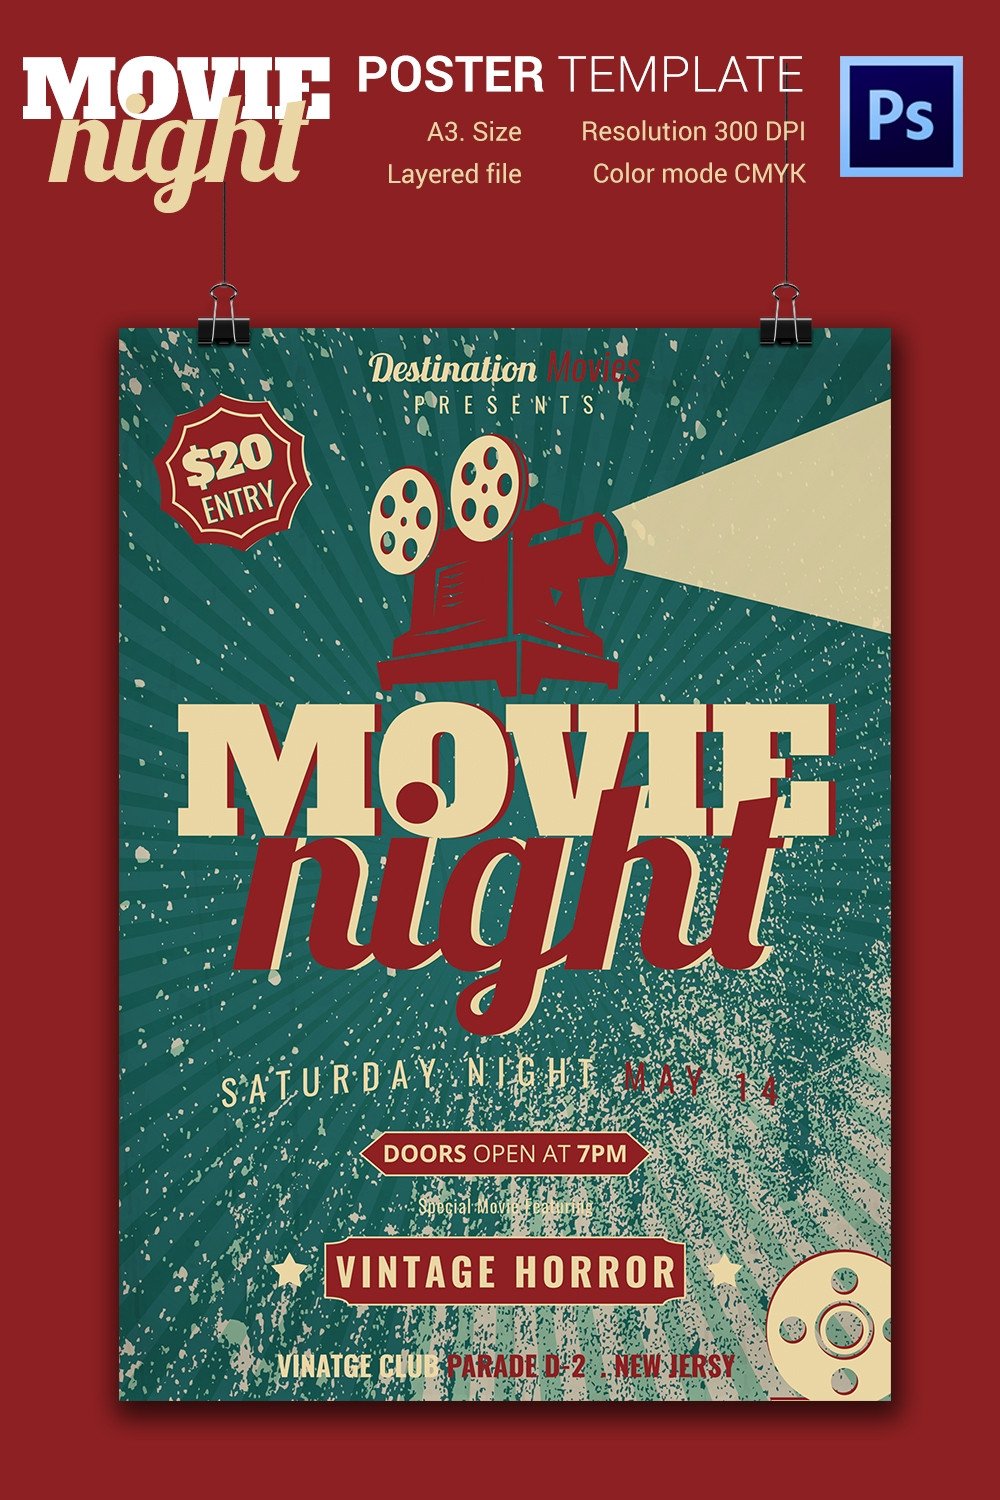 Movie Poster Templates – 44 Free PSD Format Download